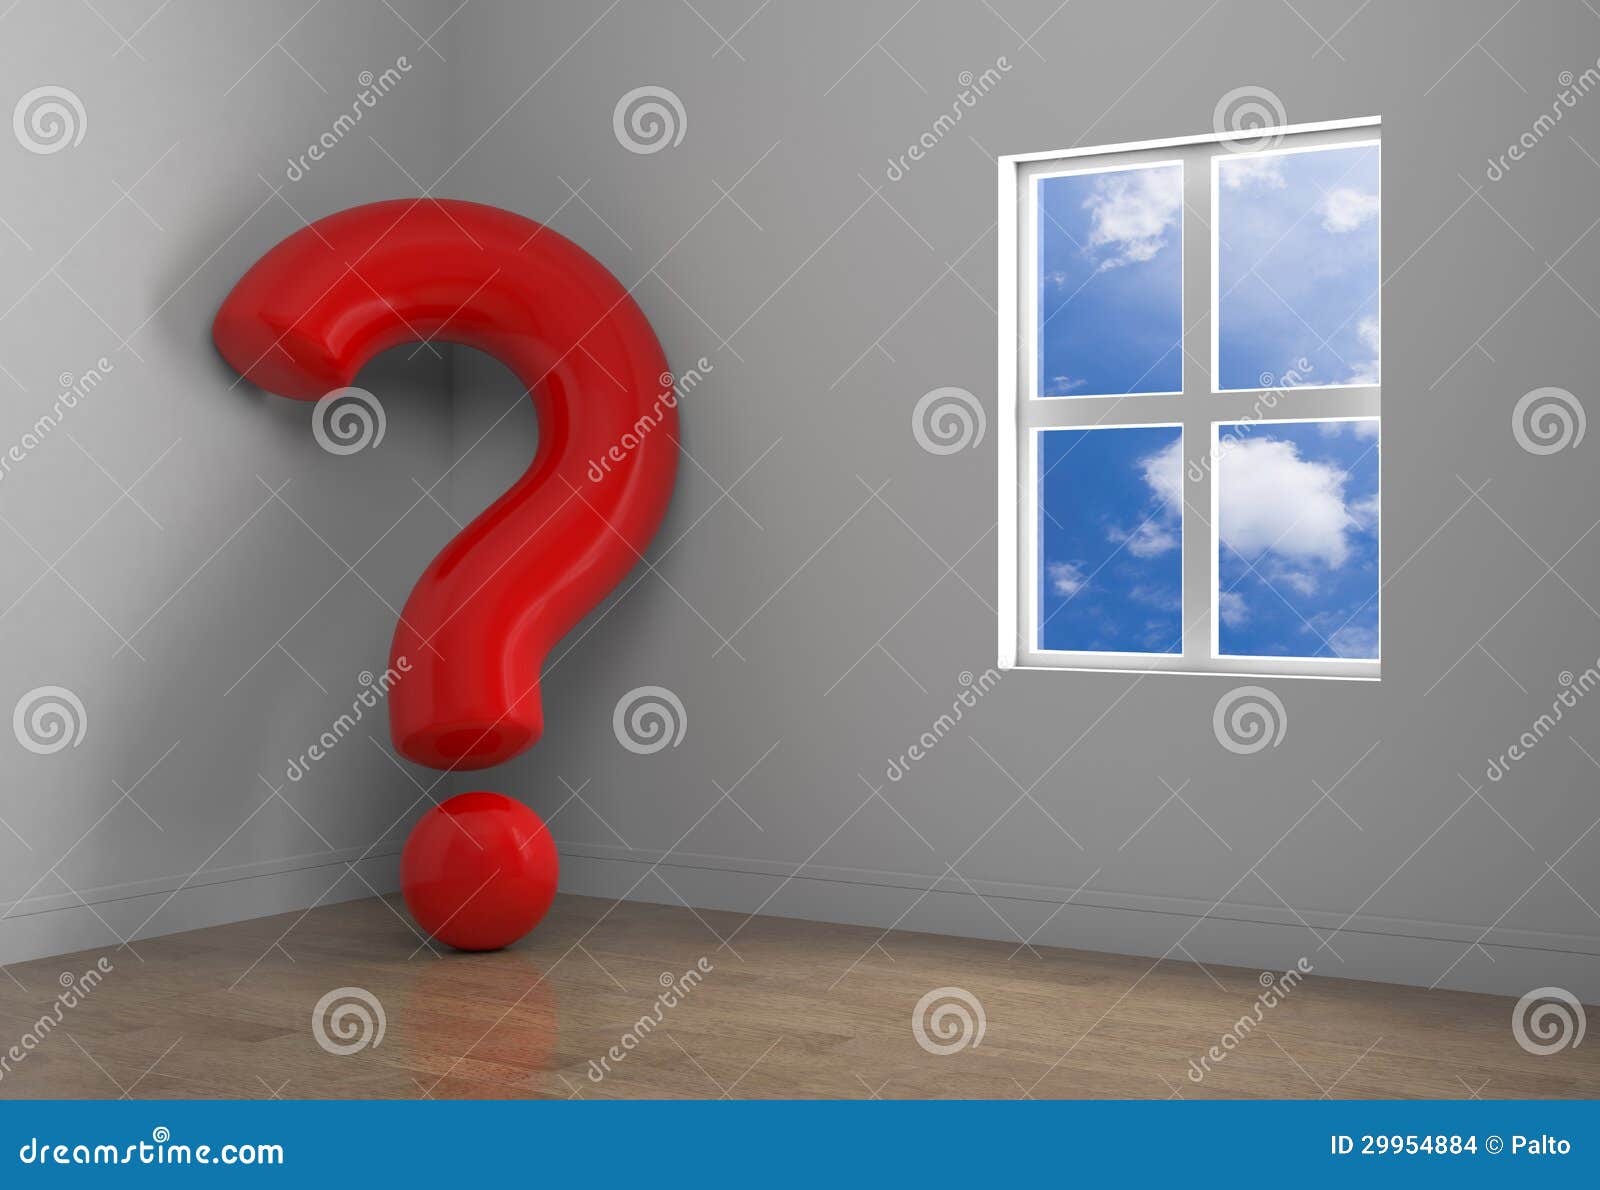 Abstract room and question stock illustration. Illustration of